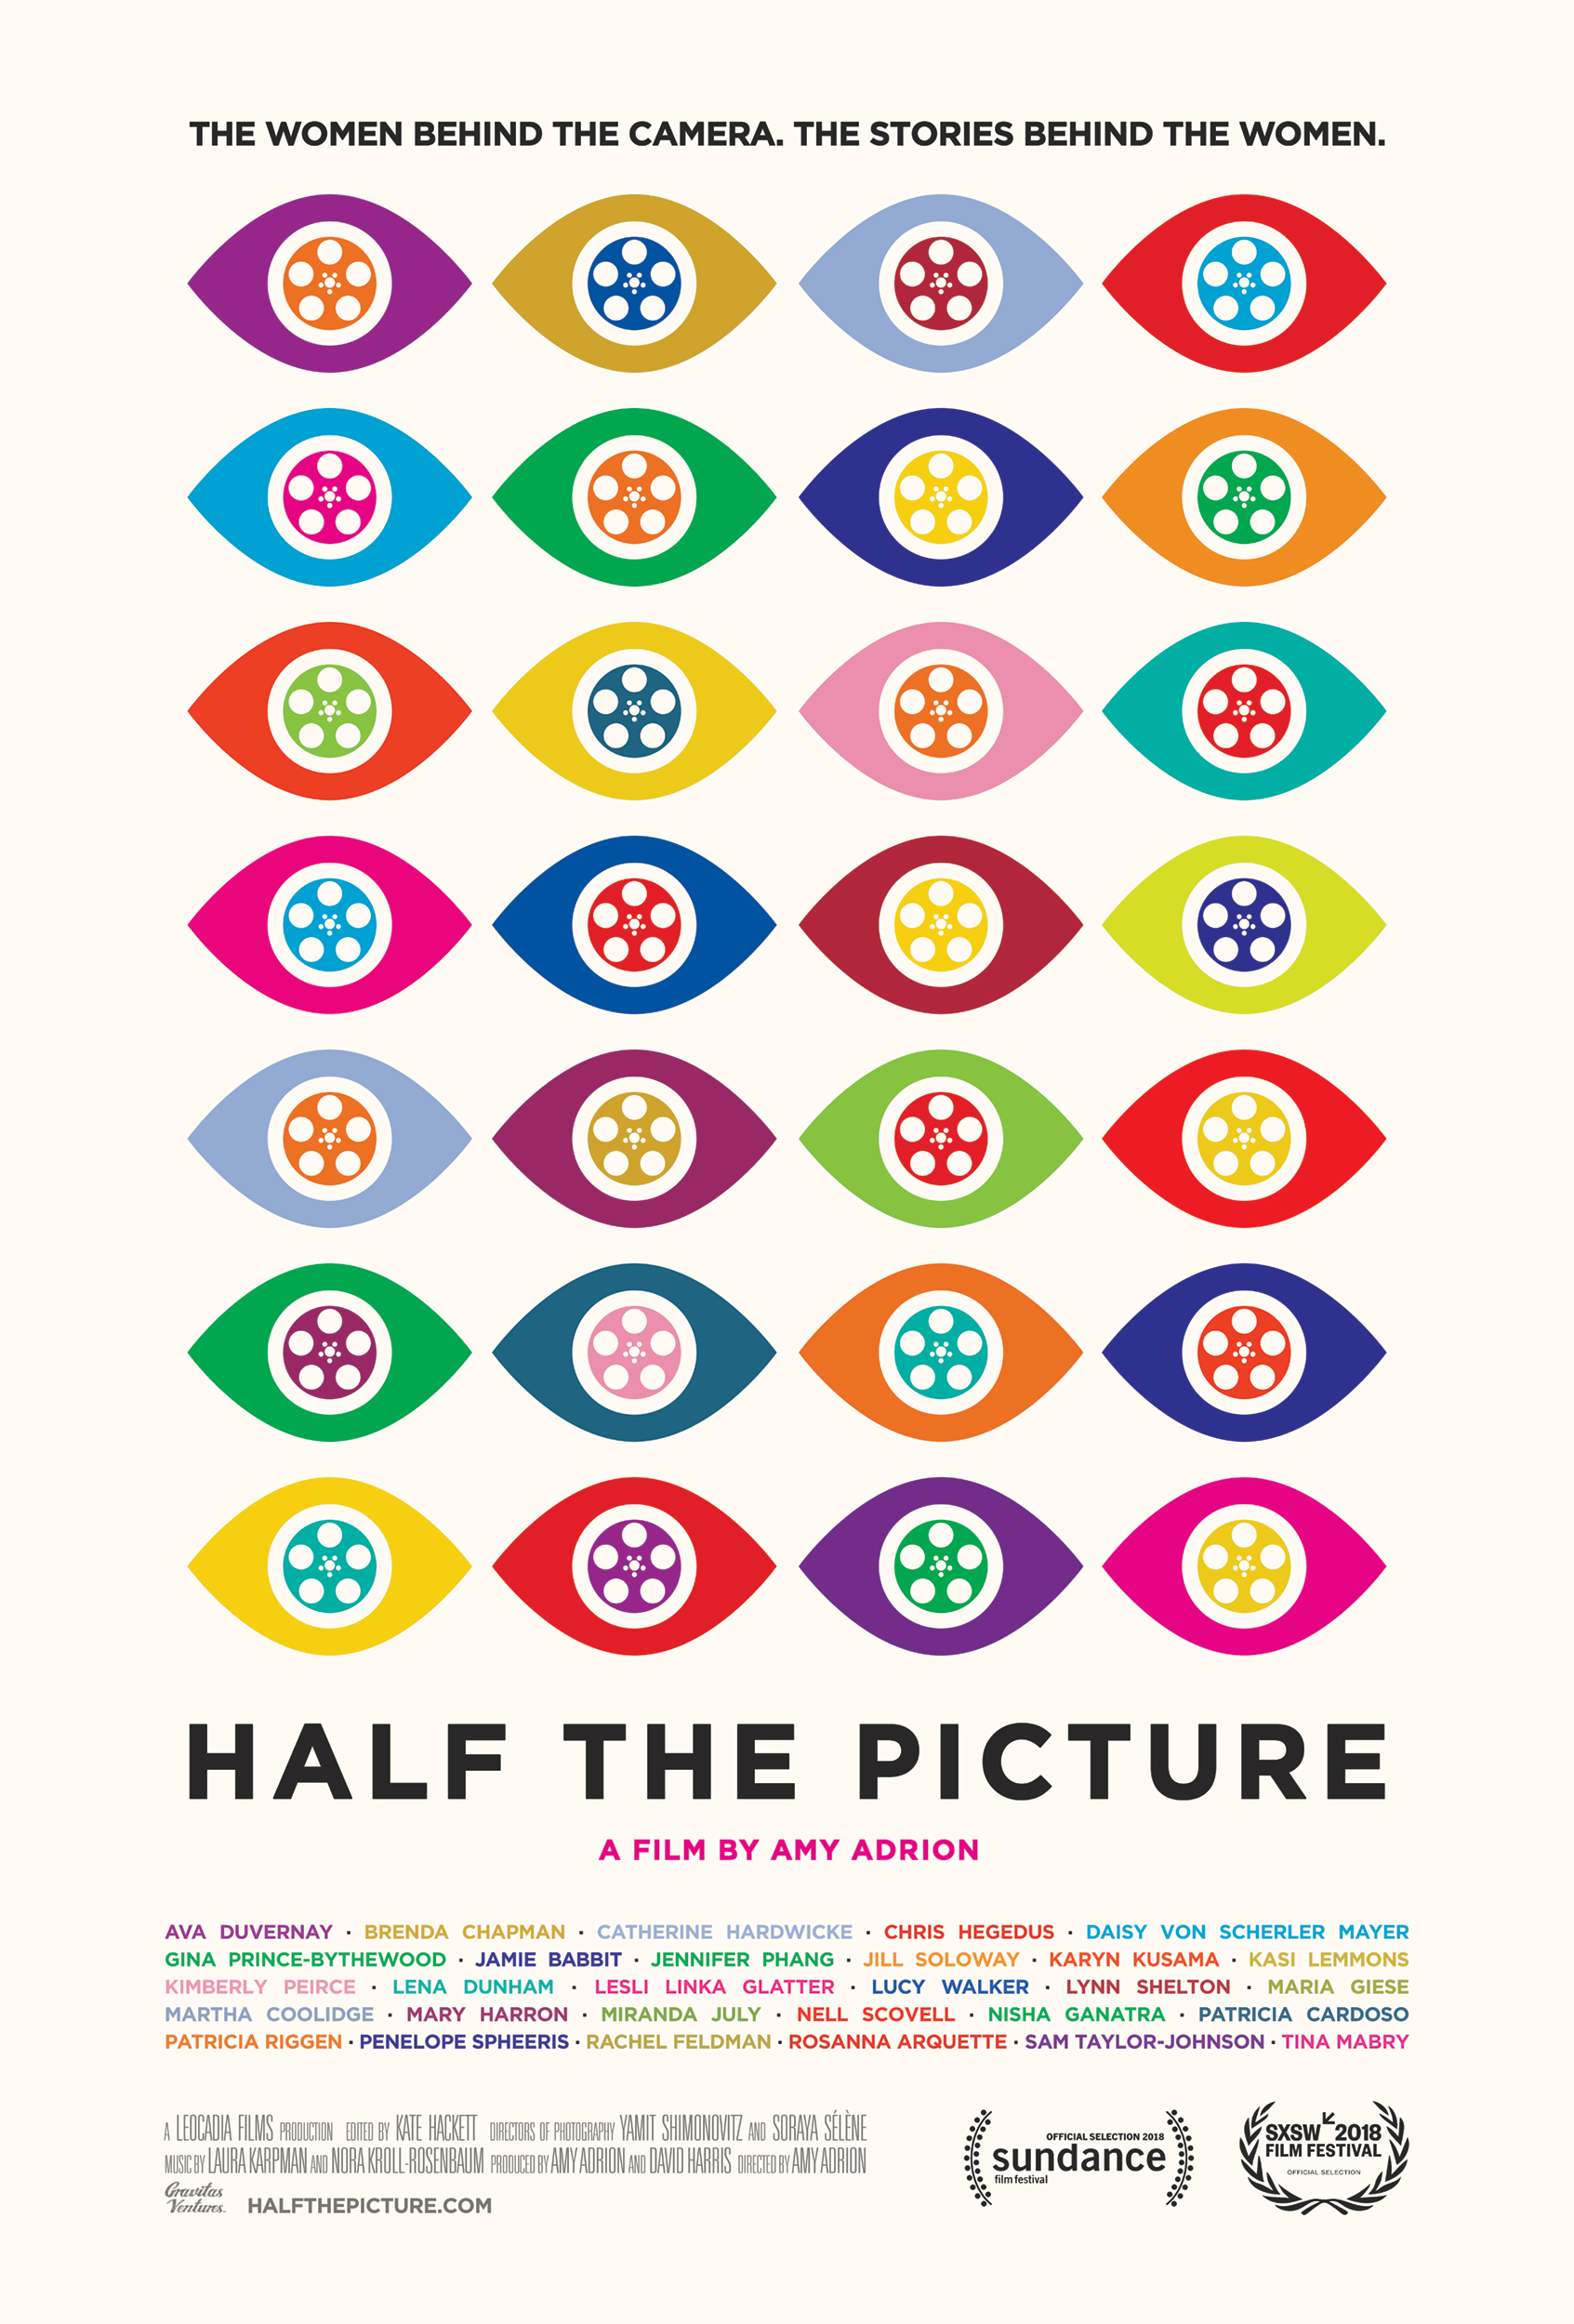 Image from the poster for the film Half the Picture